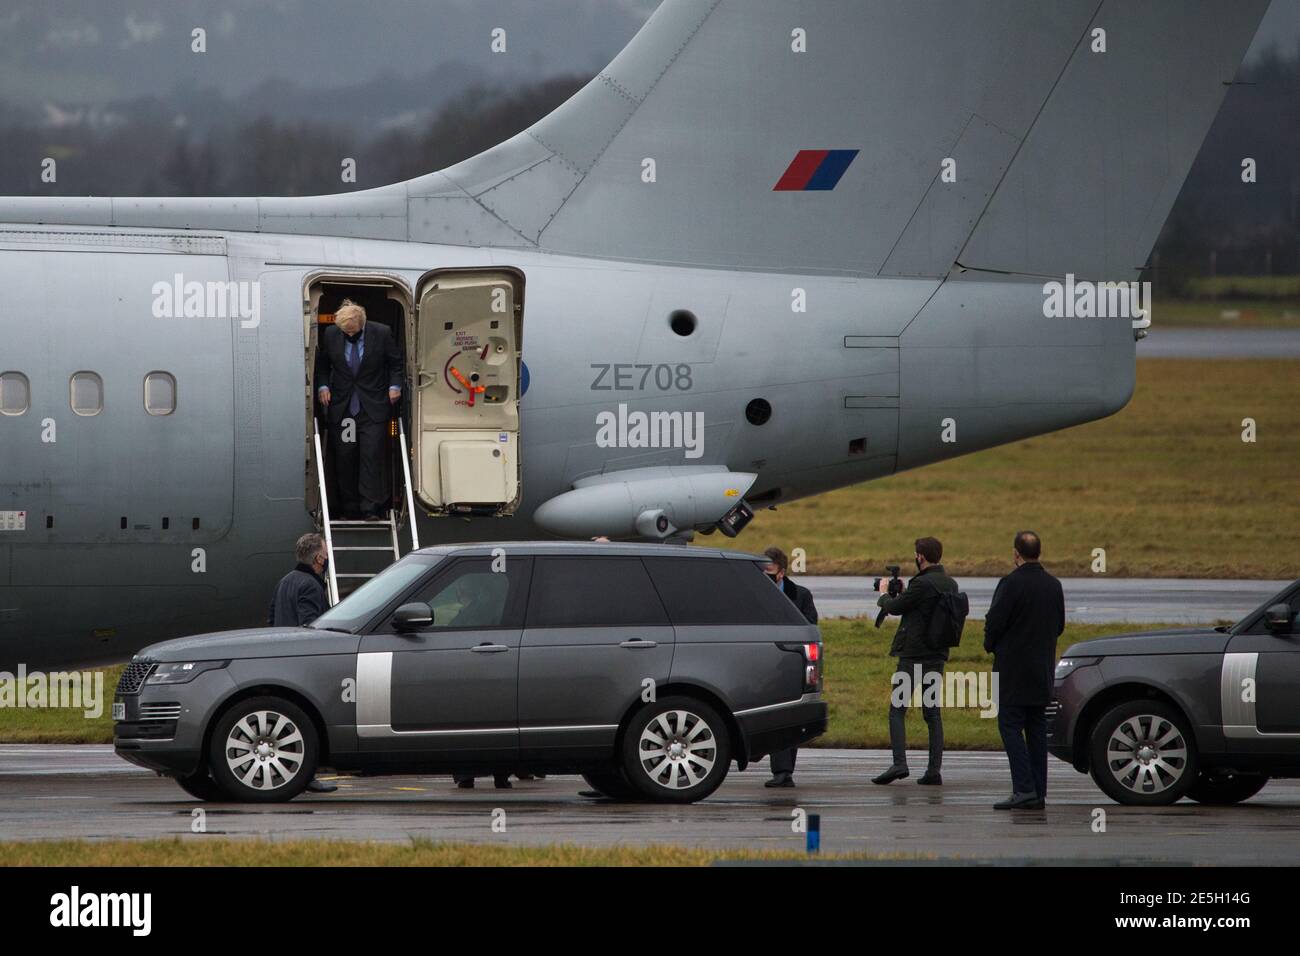 Glasgow, Scotland, UK. 28th Jan, 2021. Pictured: The UK Prime Minister Boris Johnson arrives off his plane at Glasgow Airport signalling the start of his Scotland visit. His visit has been parred by controversy due to the travel ban which the Scottish First Minister Nicola Sturgeon has put in place questioning if the PM's visit is an essential journey or not. Mr Johnson is up on important business to maintain the ties with the union. Credit: Colin Fisher/Alamy Live News Stock Photo